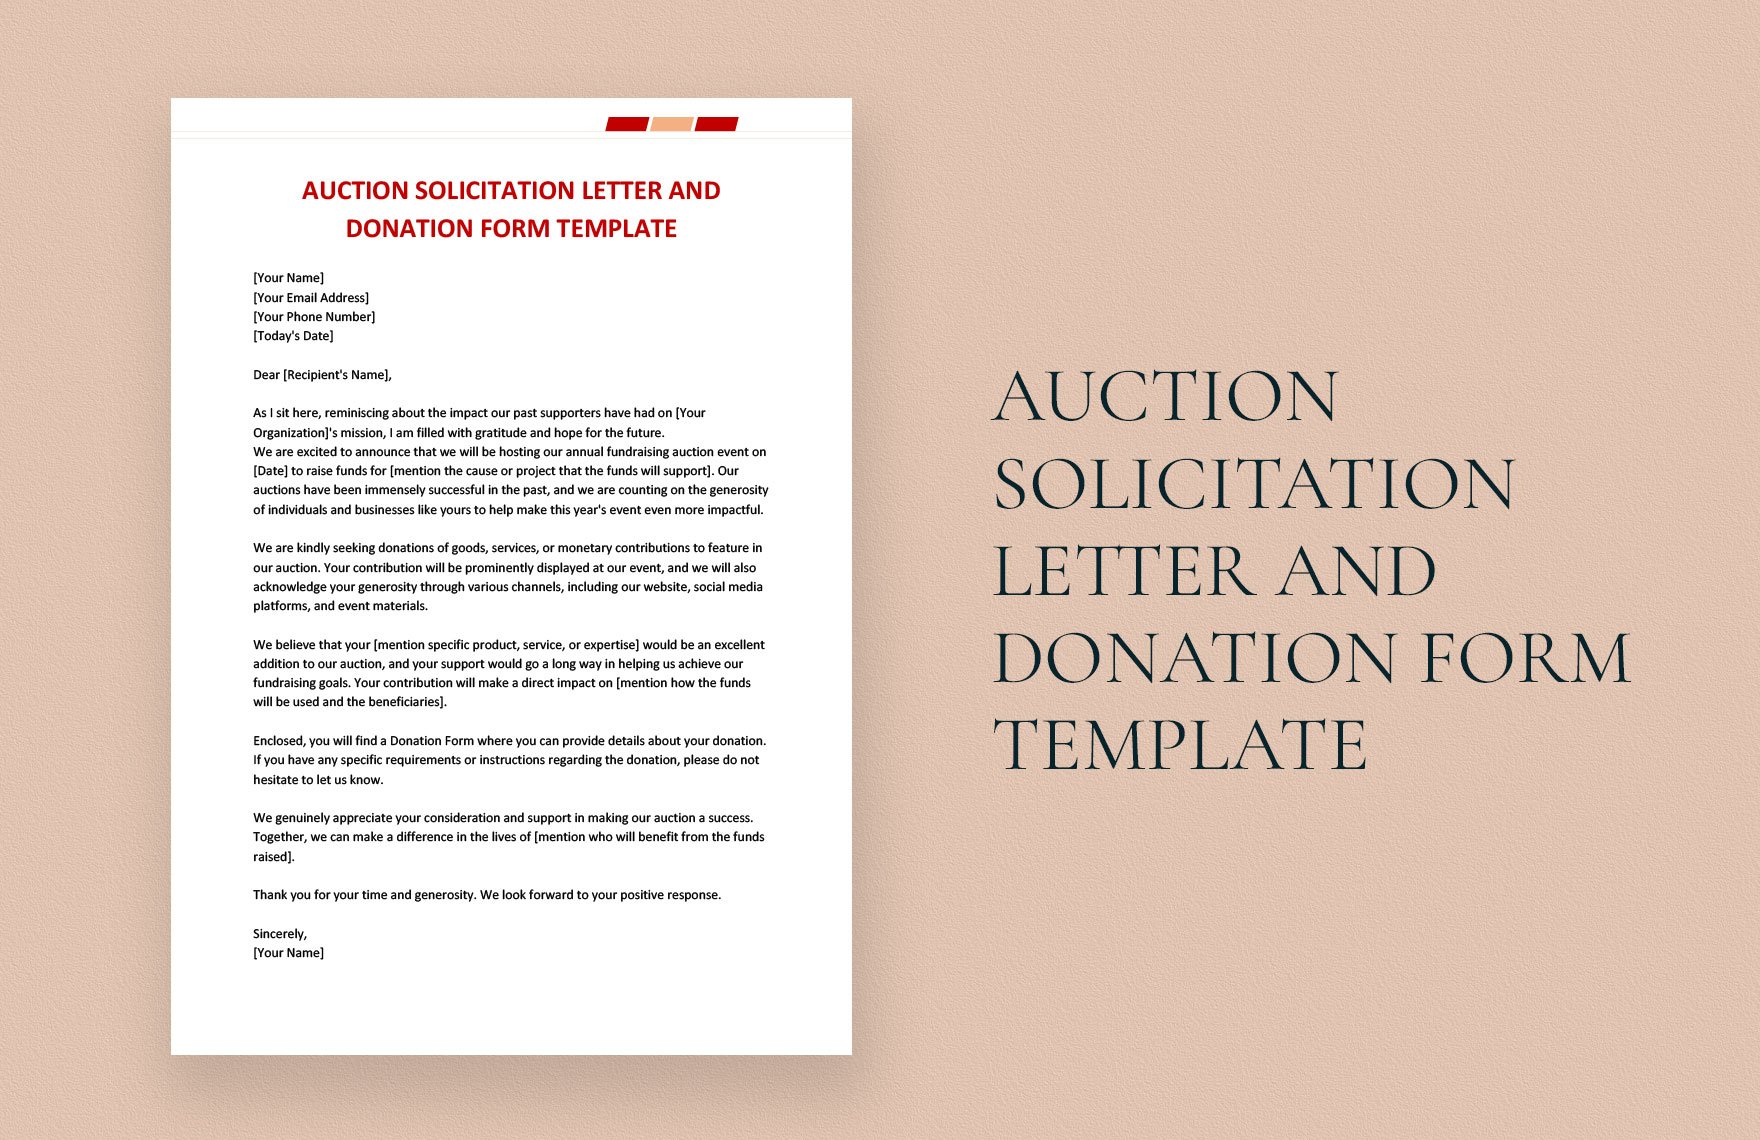 Auction Solicitation Letter and Donation Form Template